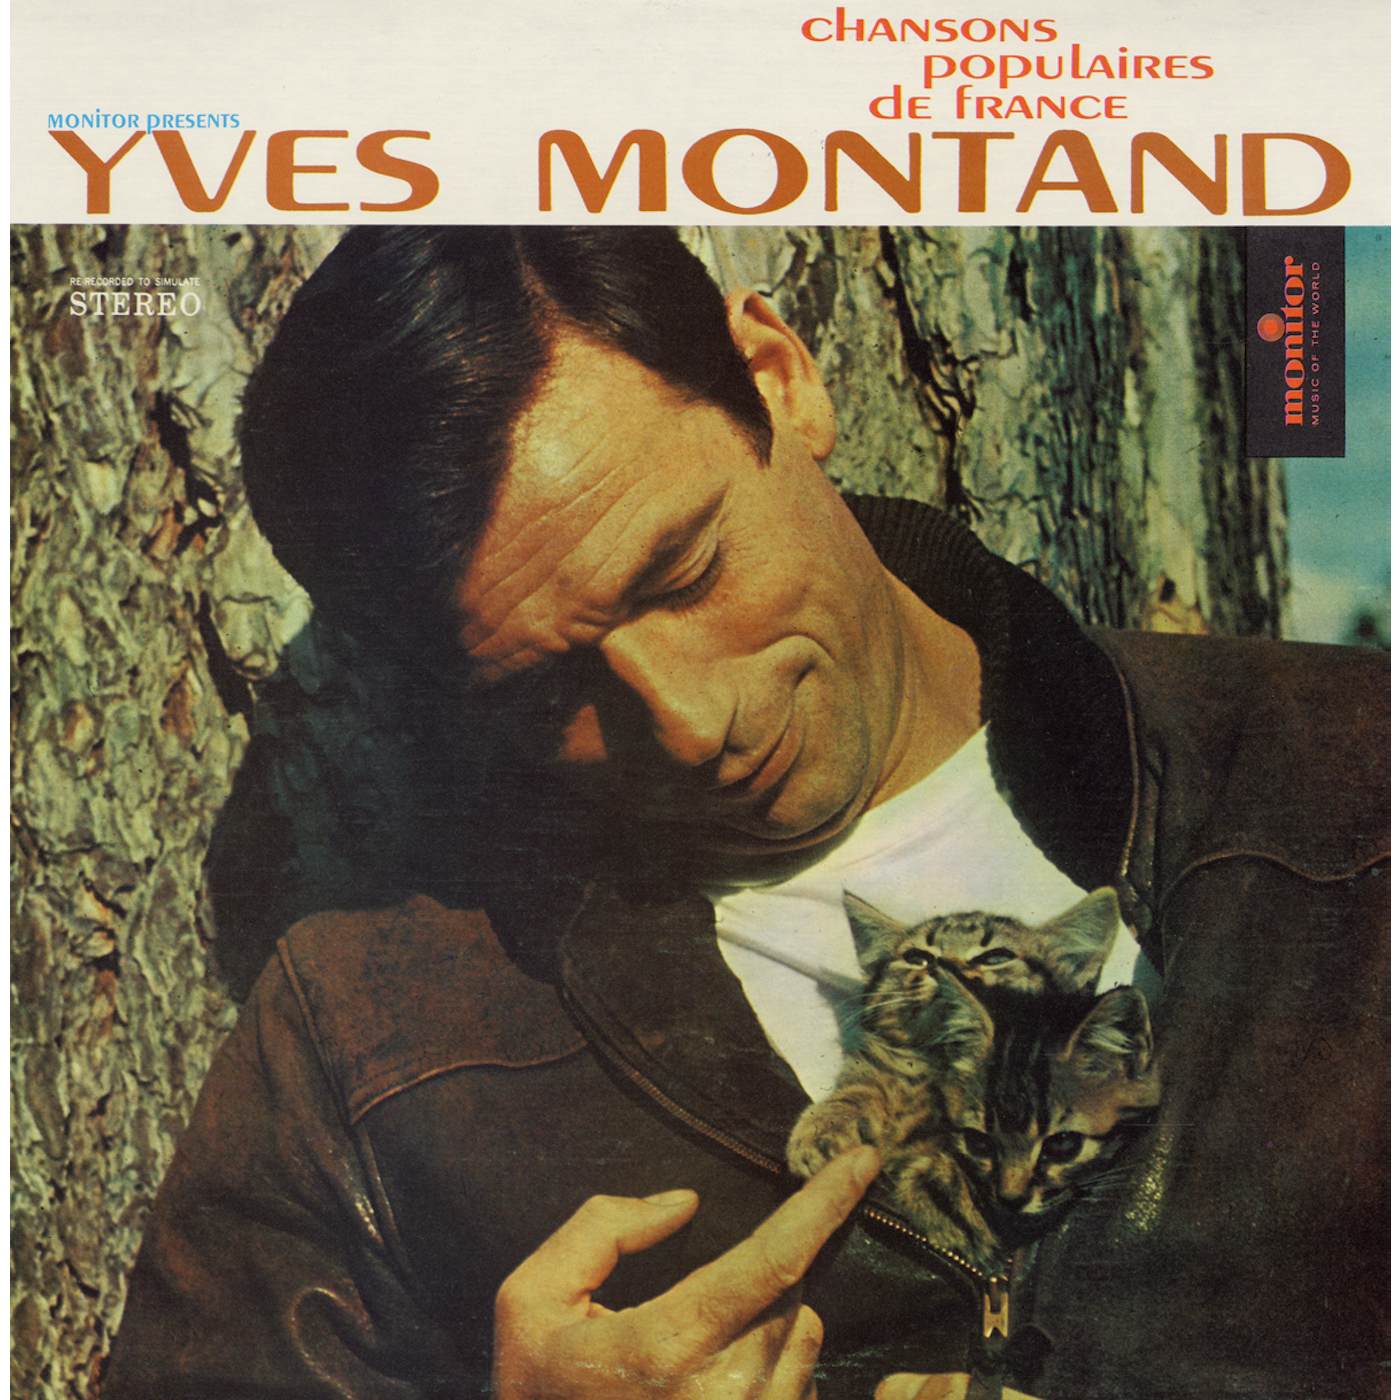 CHANSONS POPULAIRES DE FRANCE: YVES MONTAND CD